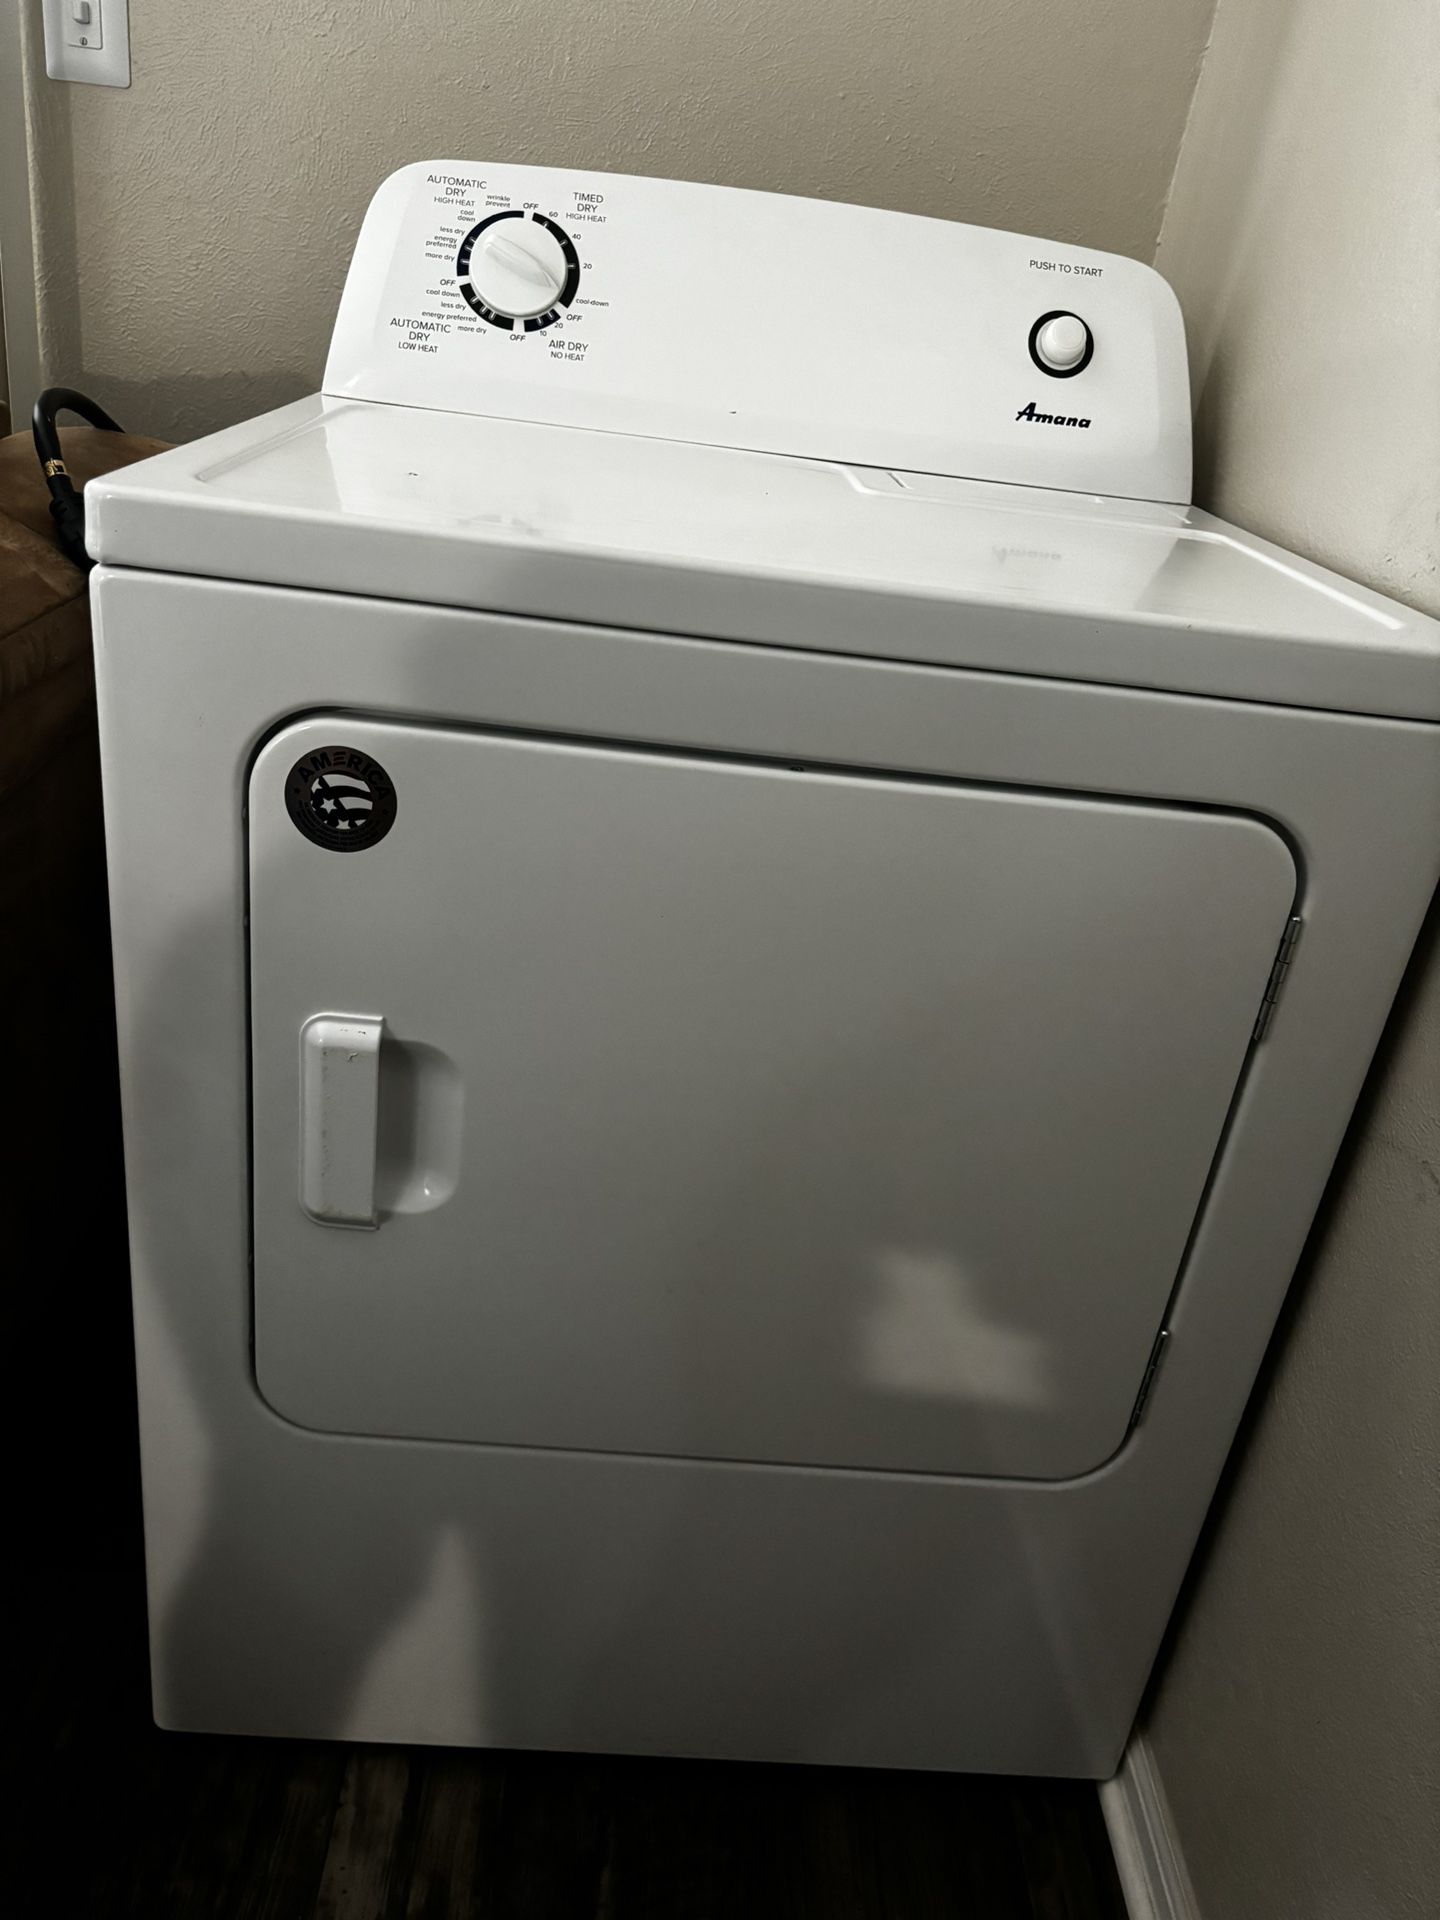 washer and dryer 